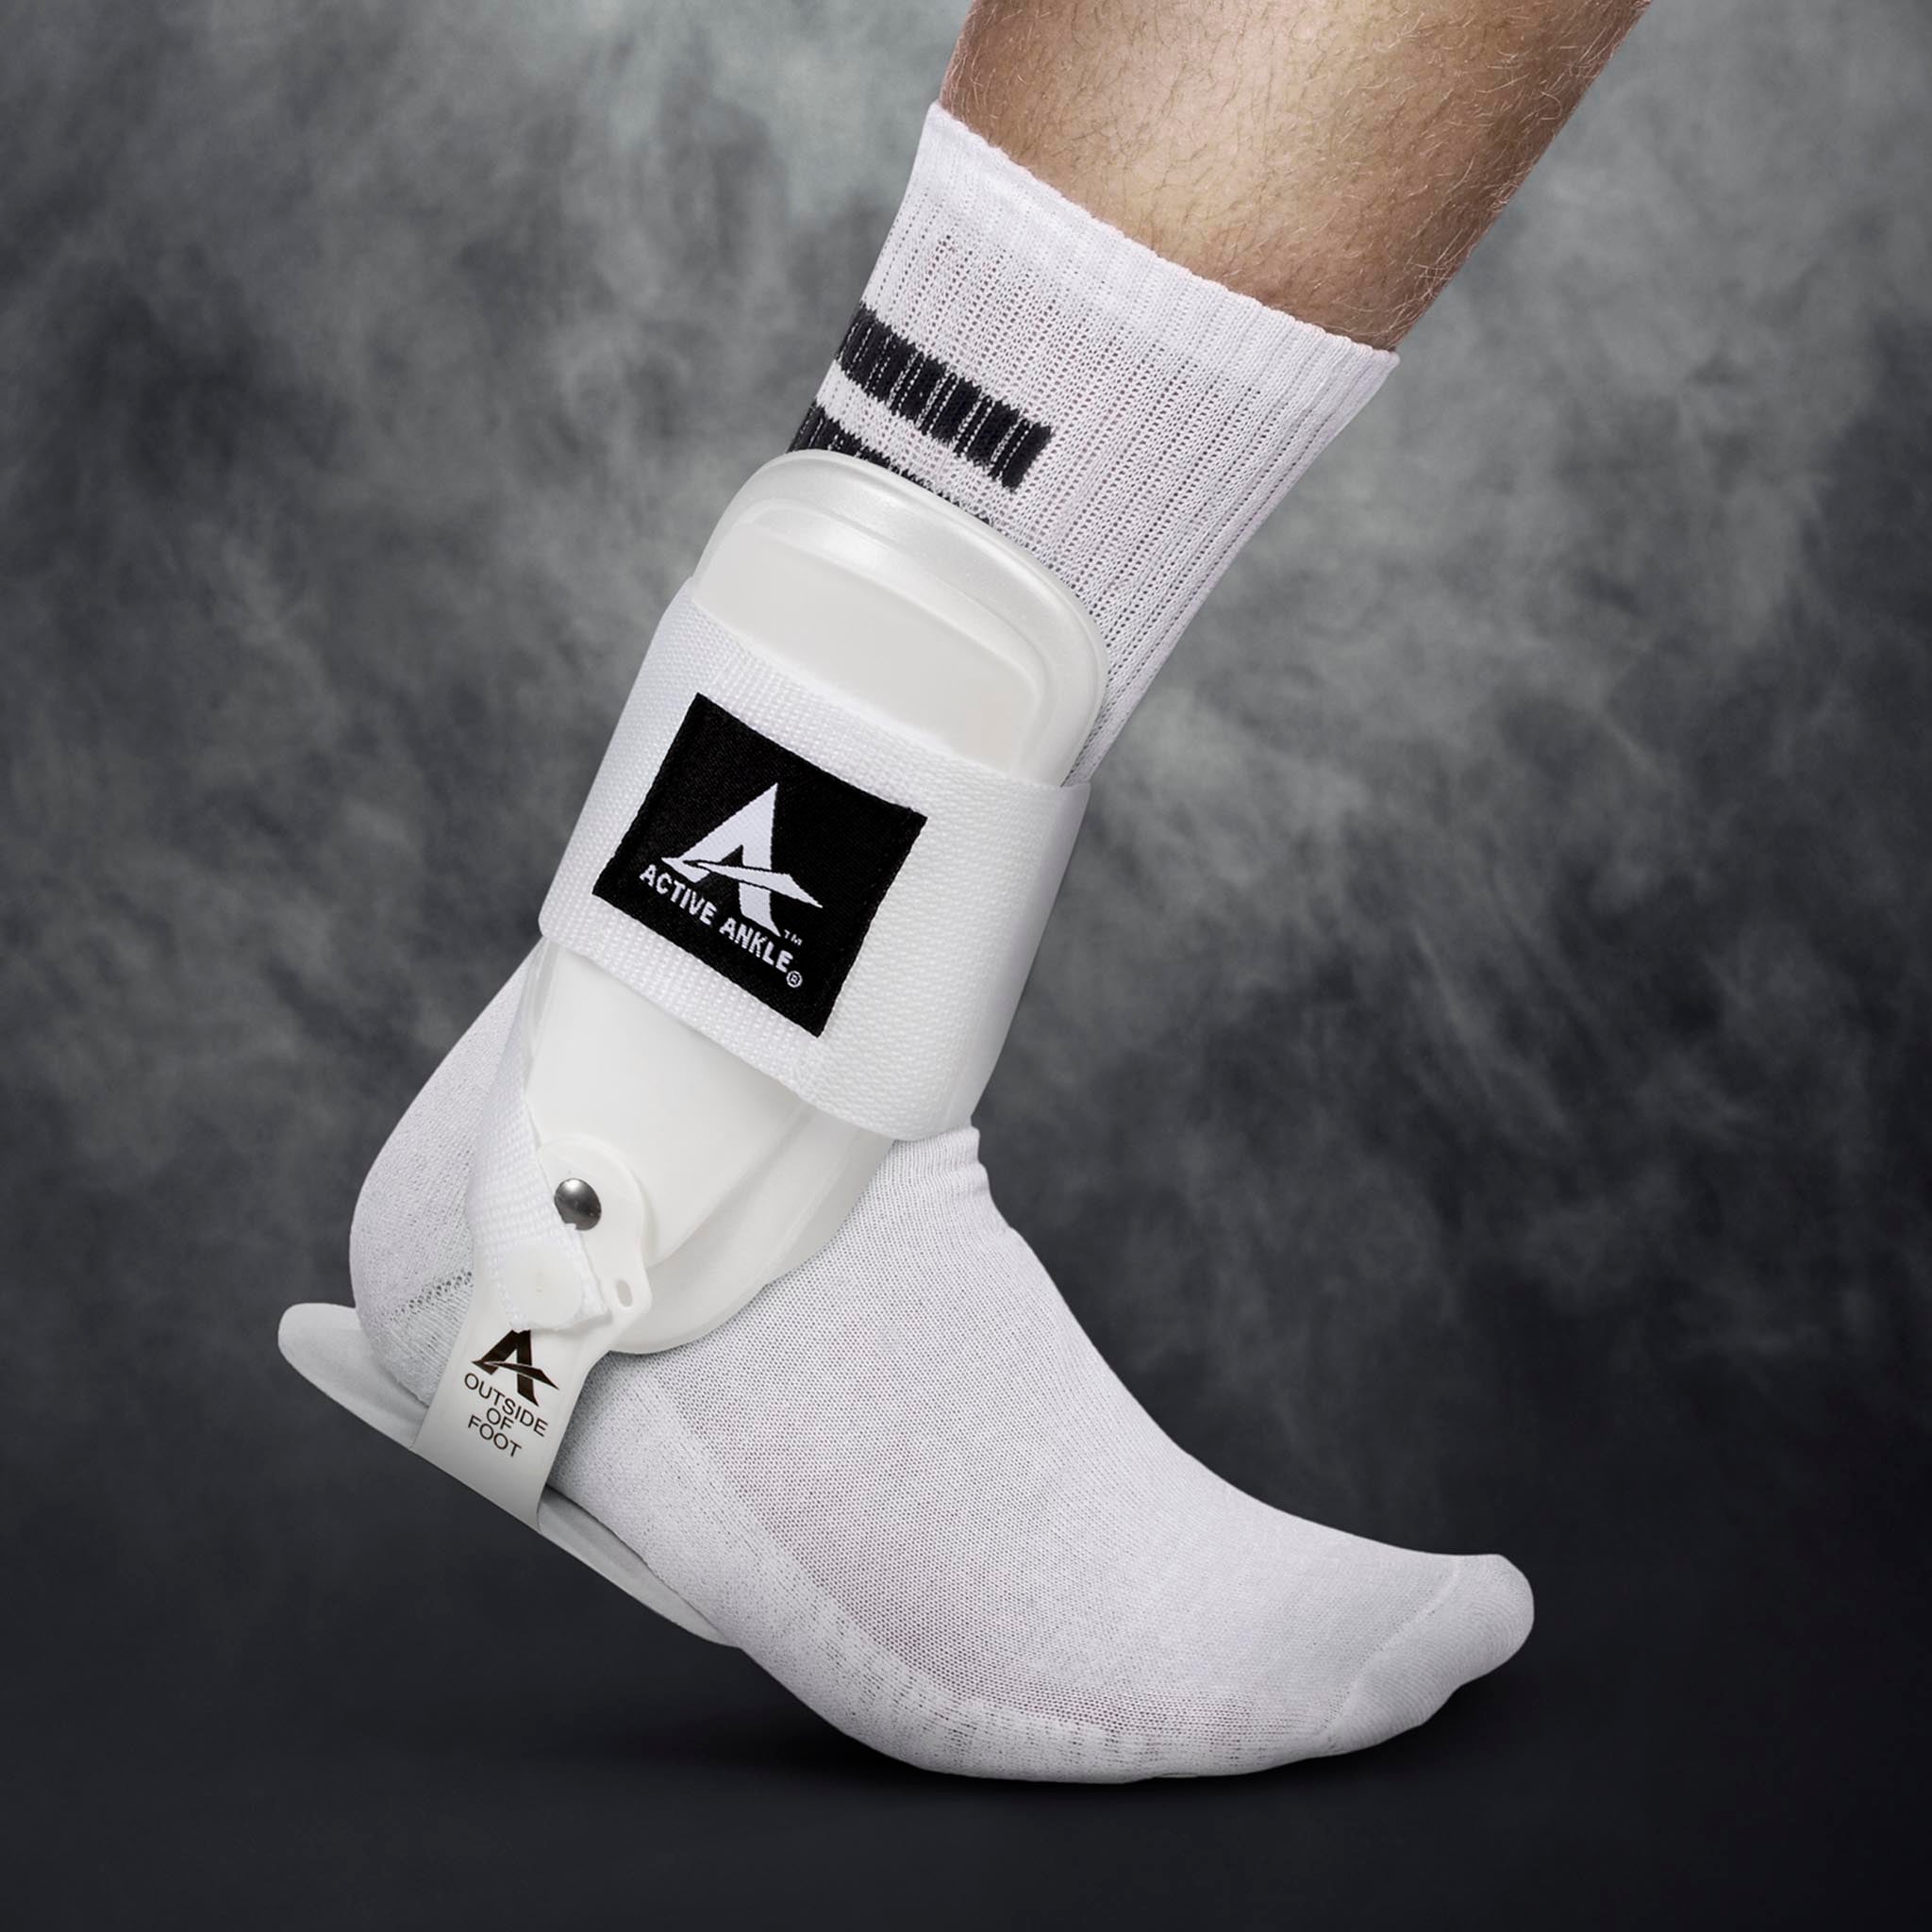 Active ankle support #colour_white